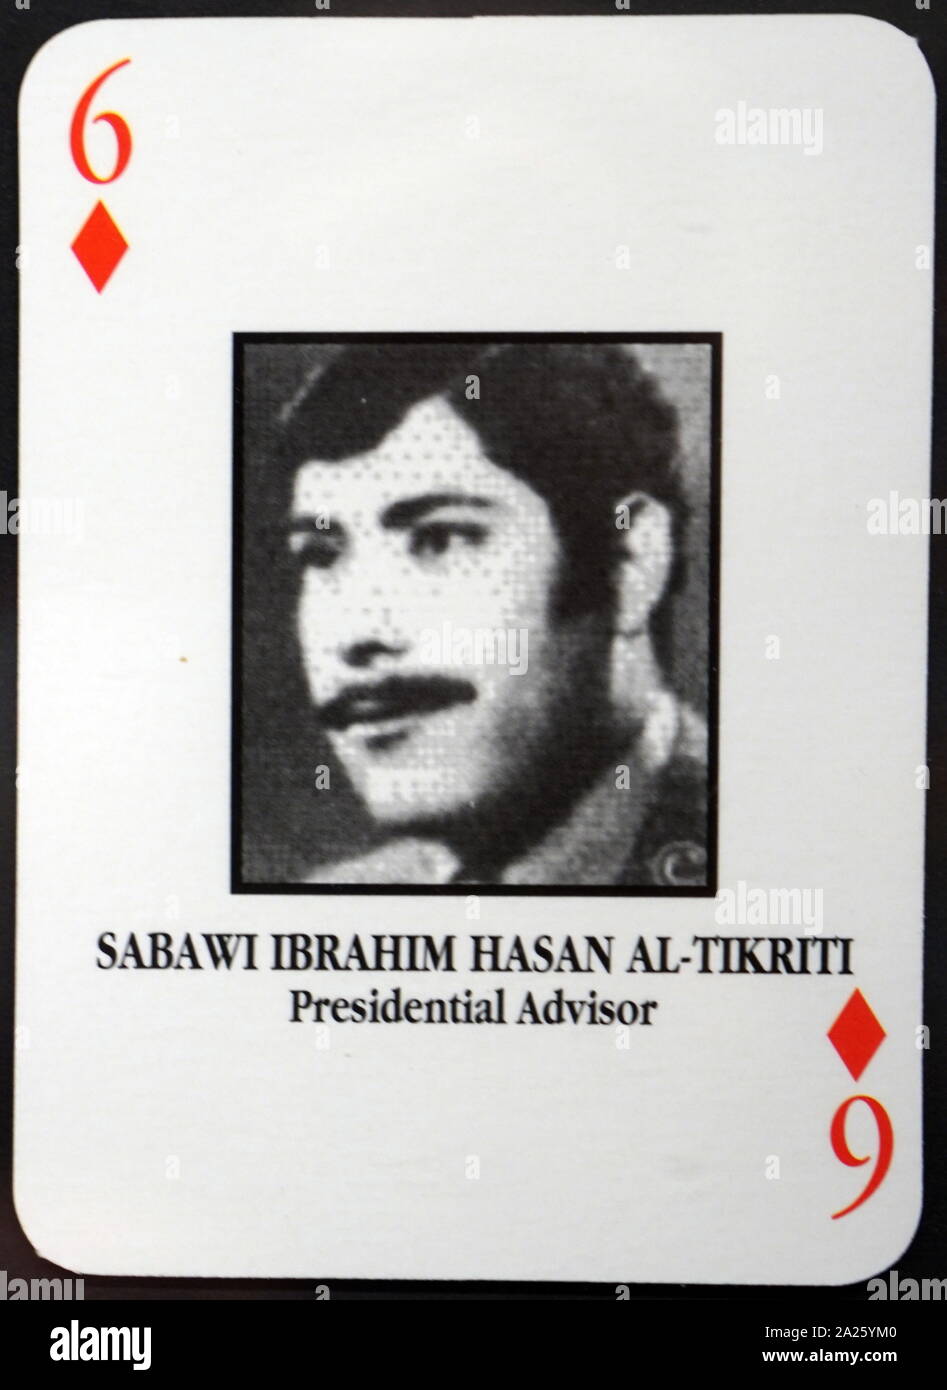 Most-wanted Iraqi playing cards - Sabawi Ibrahim Hasan Al-Tikriti (Presidential Advisor). The U.S. military developed a set of playing cards to help troop identify the most-wanted members of President Saddam Hussein's government during the 2003 invasion of Iraq. Stock Photo